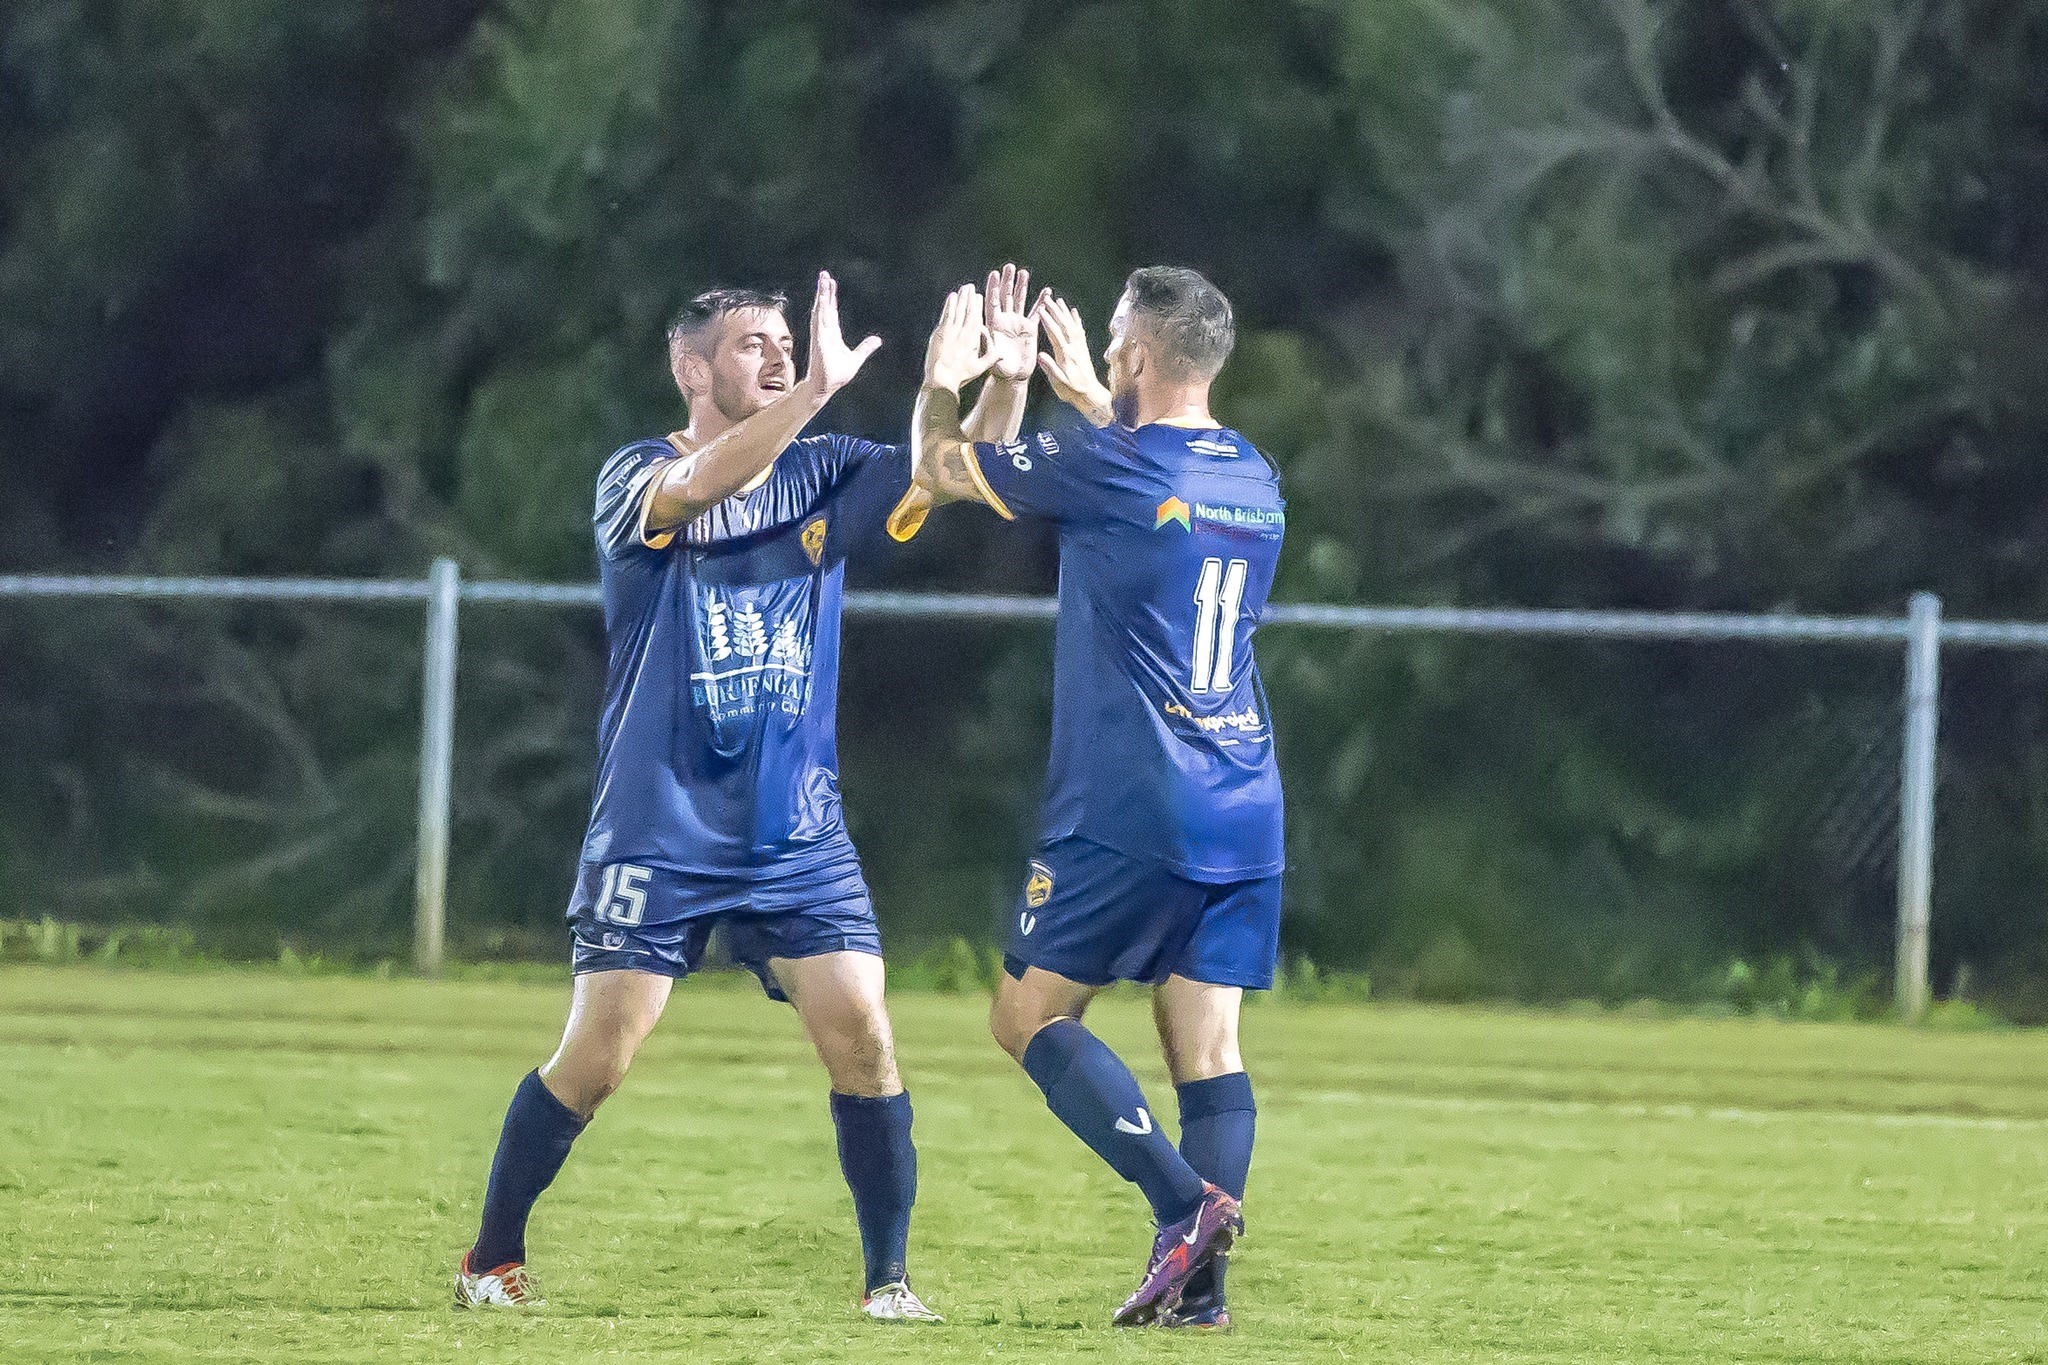 The Narangba Eagles celebrate one of their five goals in their victory against Tweed United. Photo credit Yvonne PackbierMMM Photography.